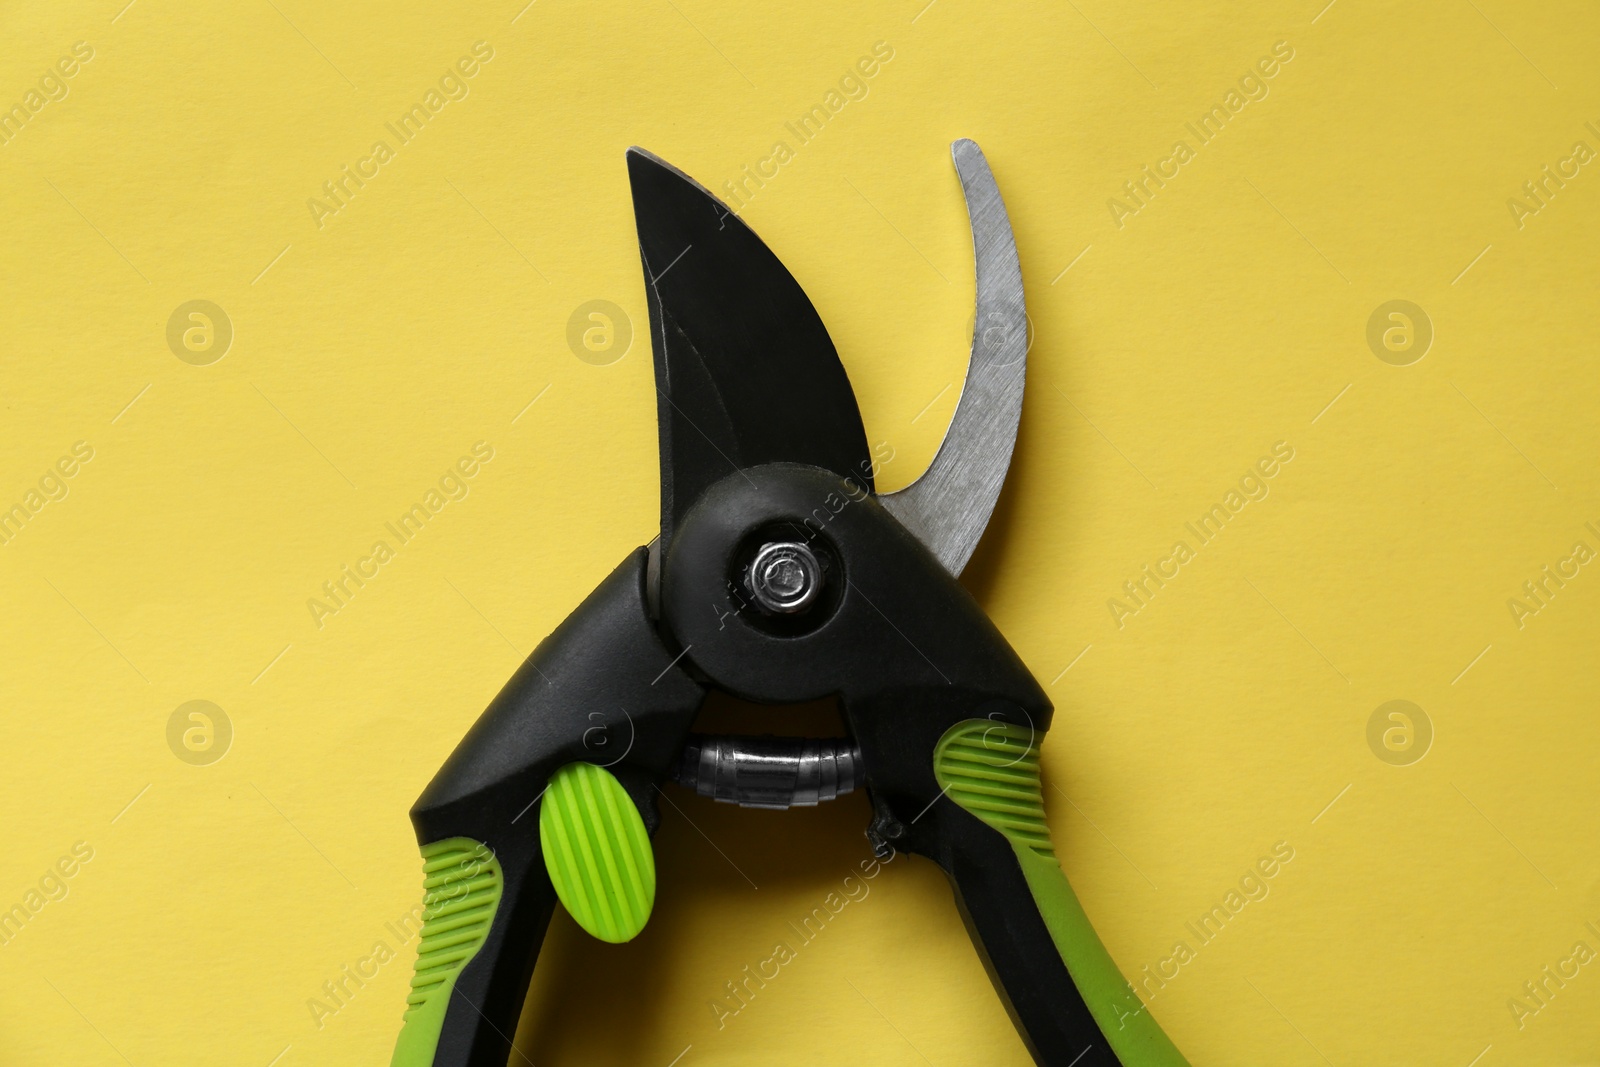 Photo of Secateur on light yellow background, top view